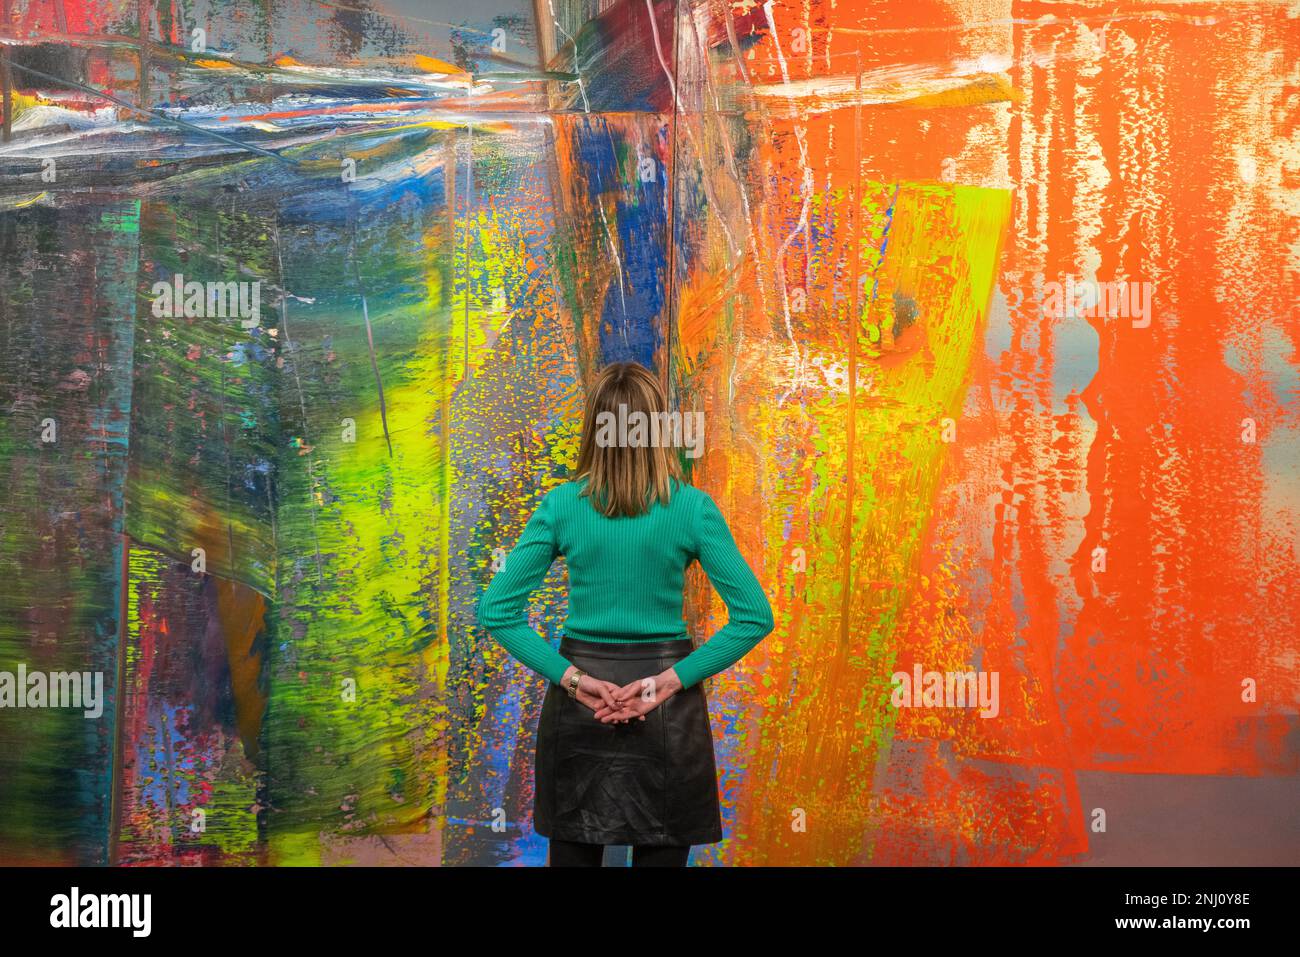 London, UK. 22 February 2023. Gerhard Richter, Abstraktes Bild. (Estimate Upon Request). Press preview of Modern & Contemporary Art auction at Sotheby's  The sale takes place on 1 March at Sotheby's London  Credit: amer ghazzal/Alamy Live News Stock Photo